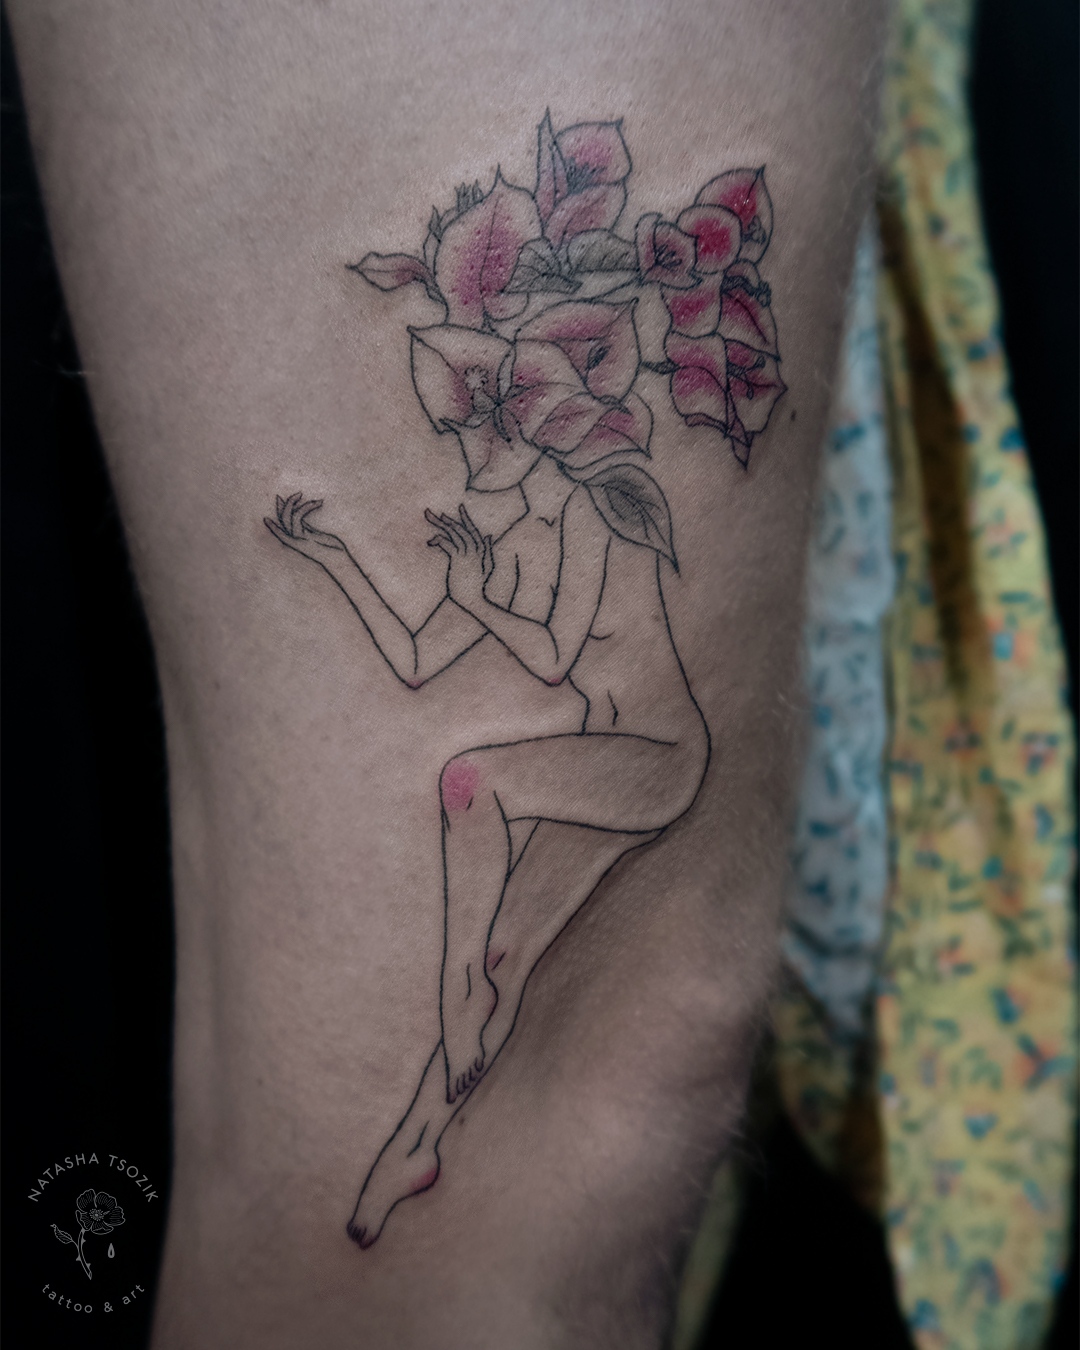 A slightly colored floral tattoo on a leg picturing a flower head girl.